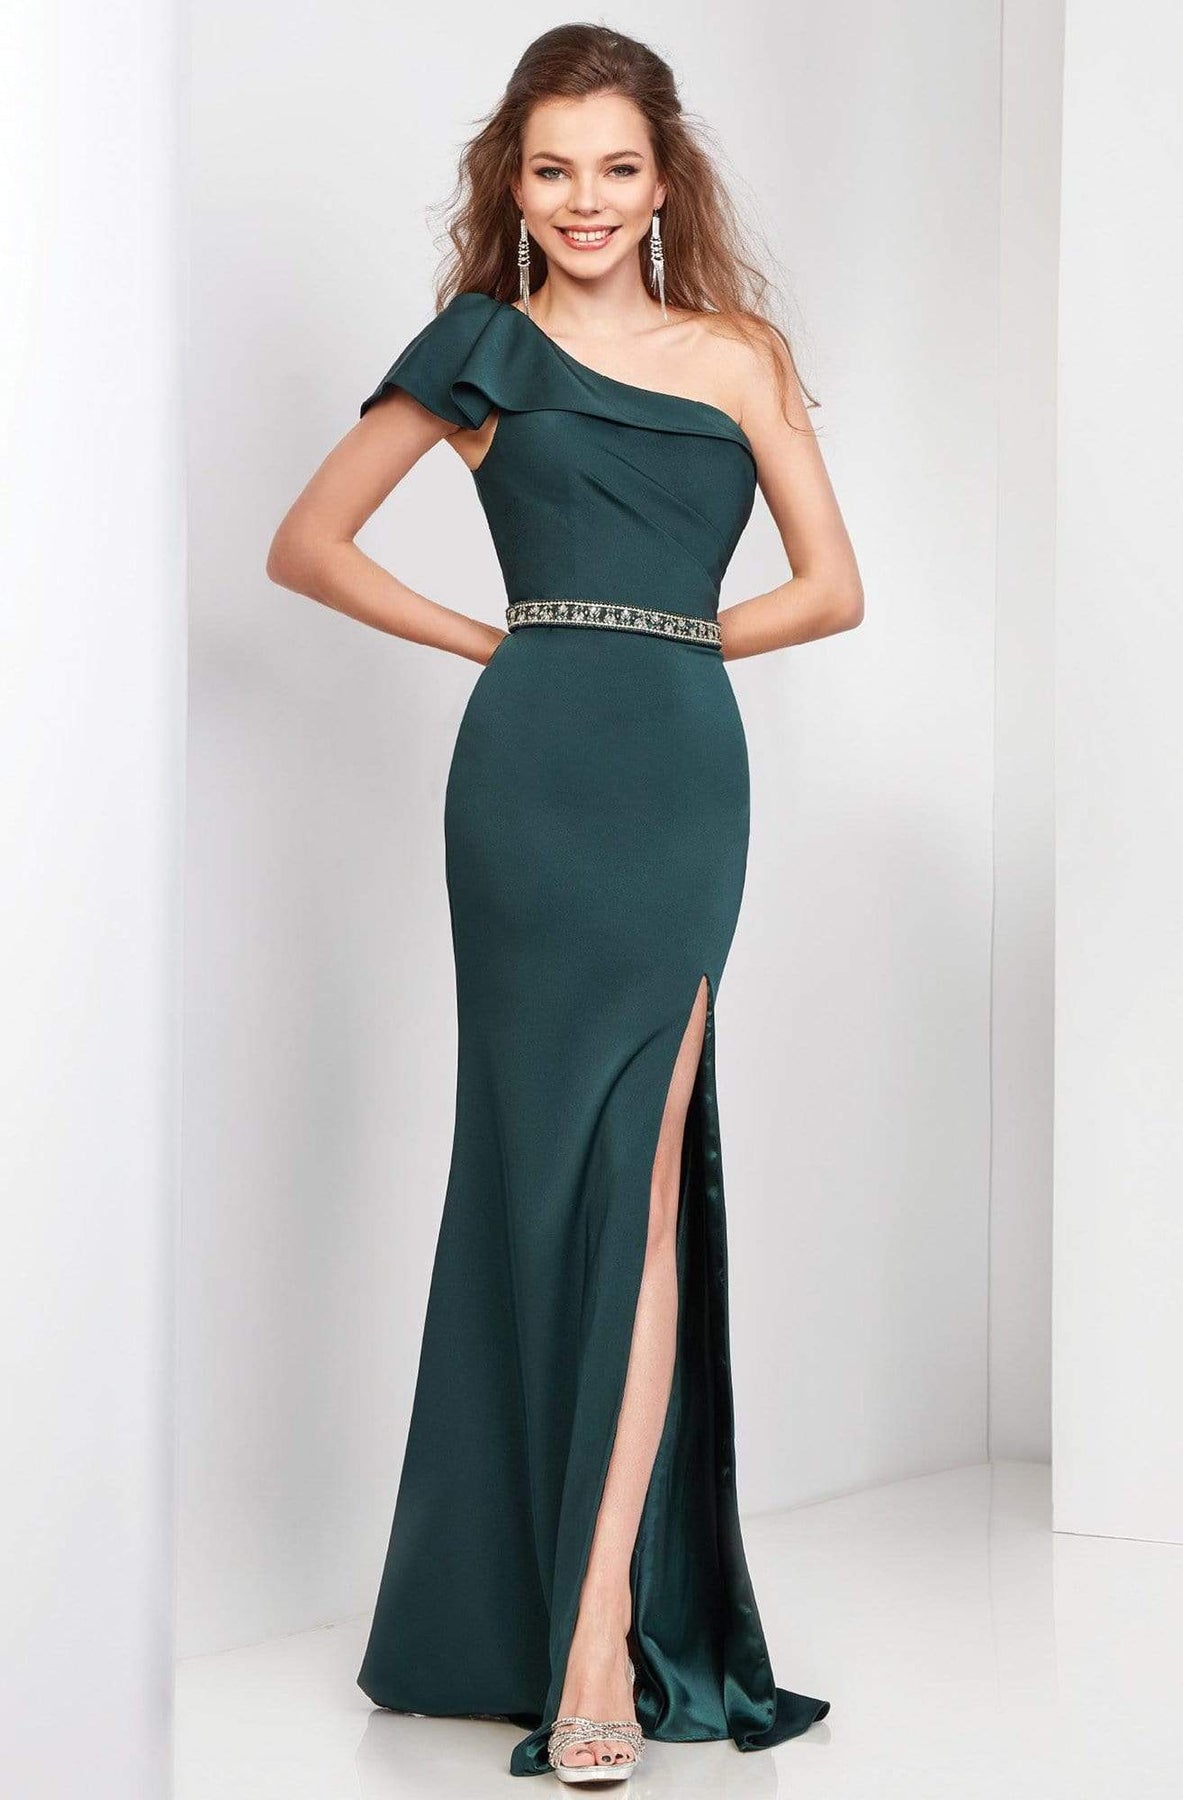 Clarisse - 4929 Butterfly Sleeve Asymmetrical Long Gown Special Occasion Dress 0 / ForestGreen